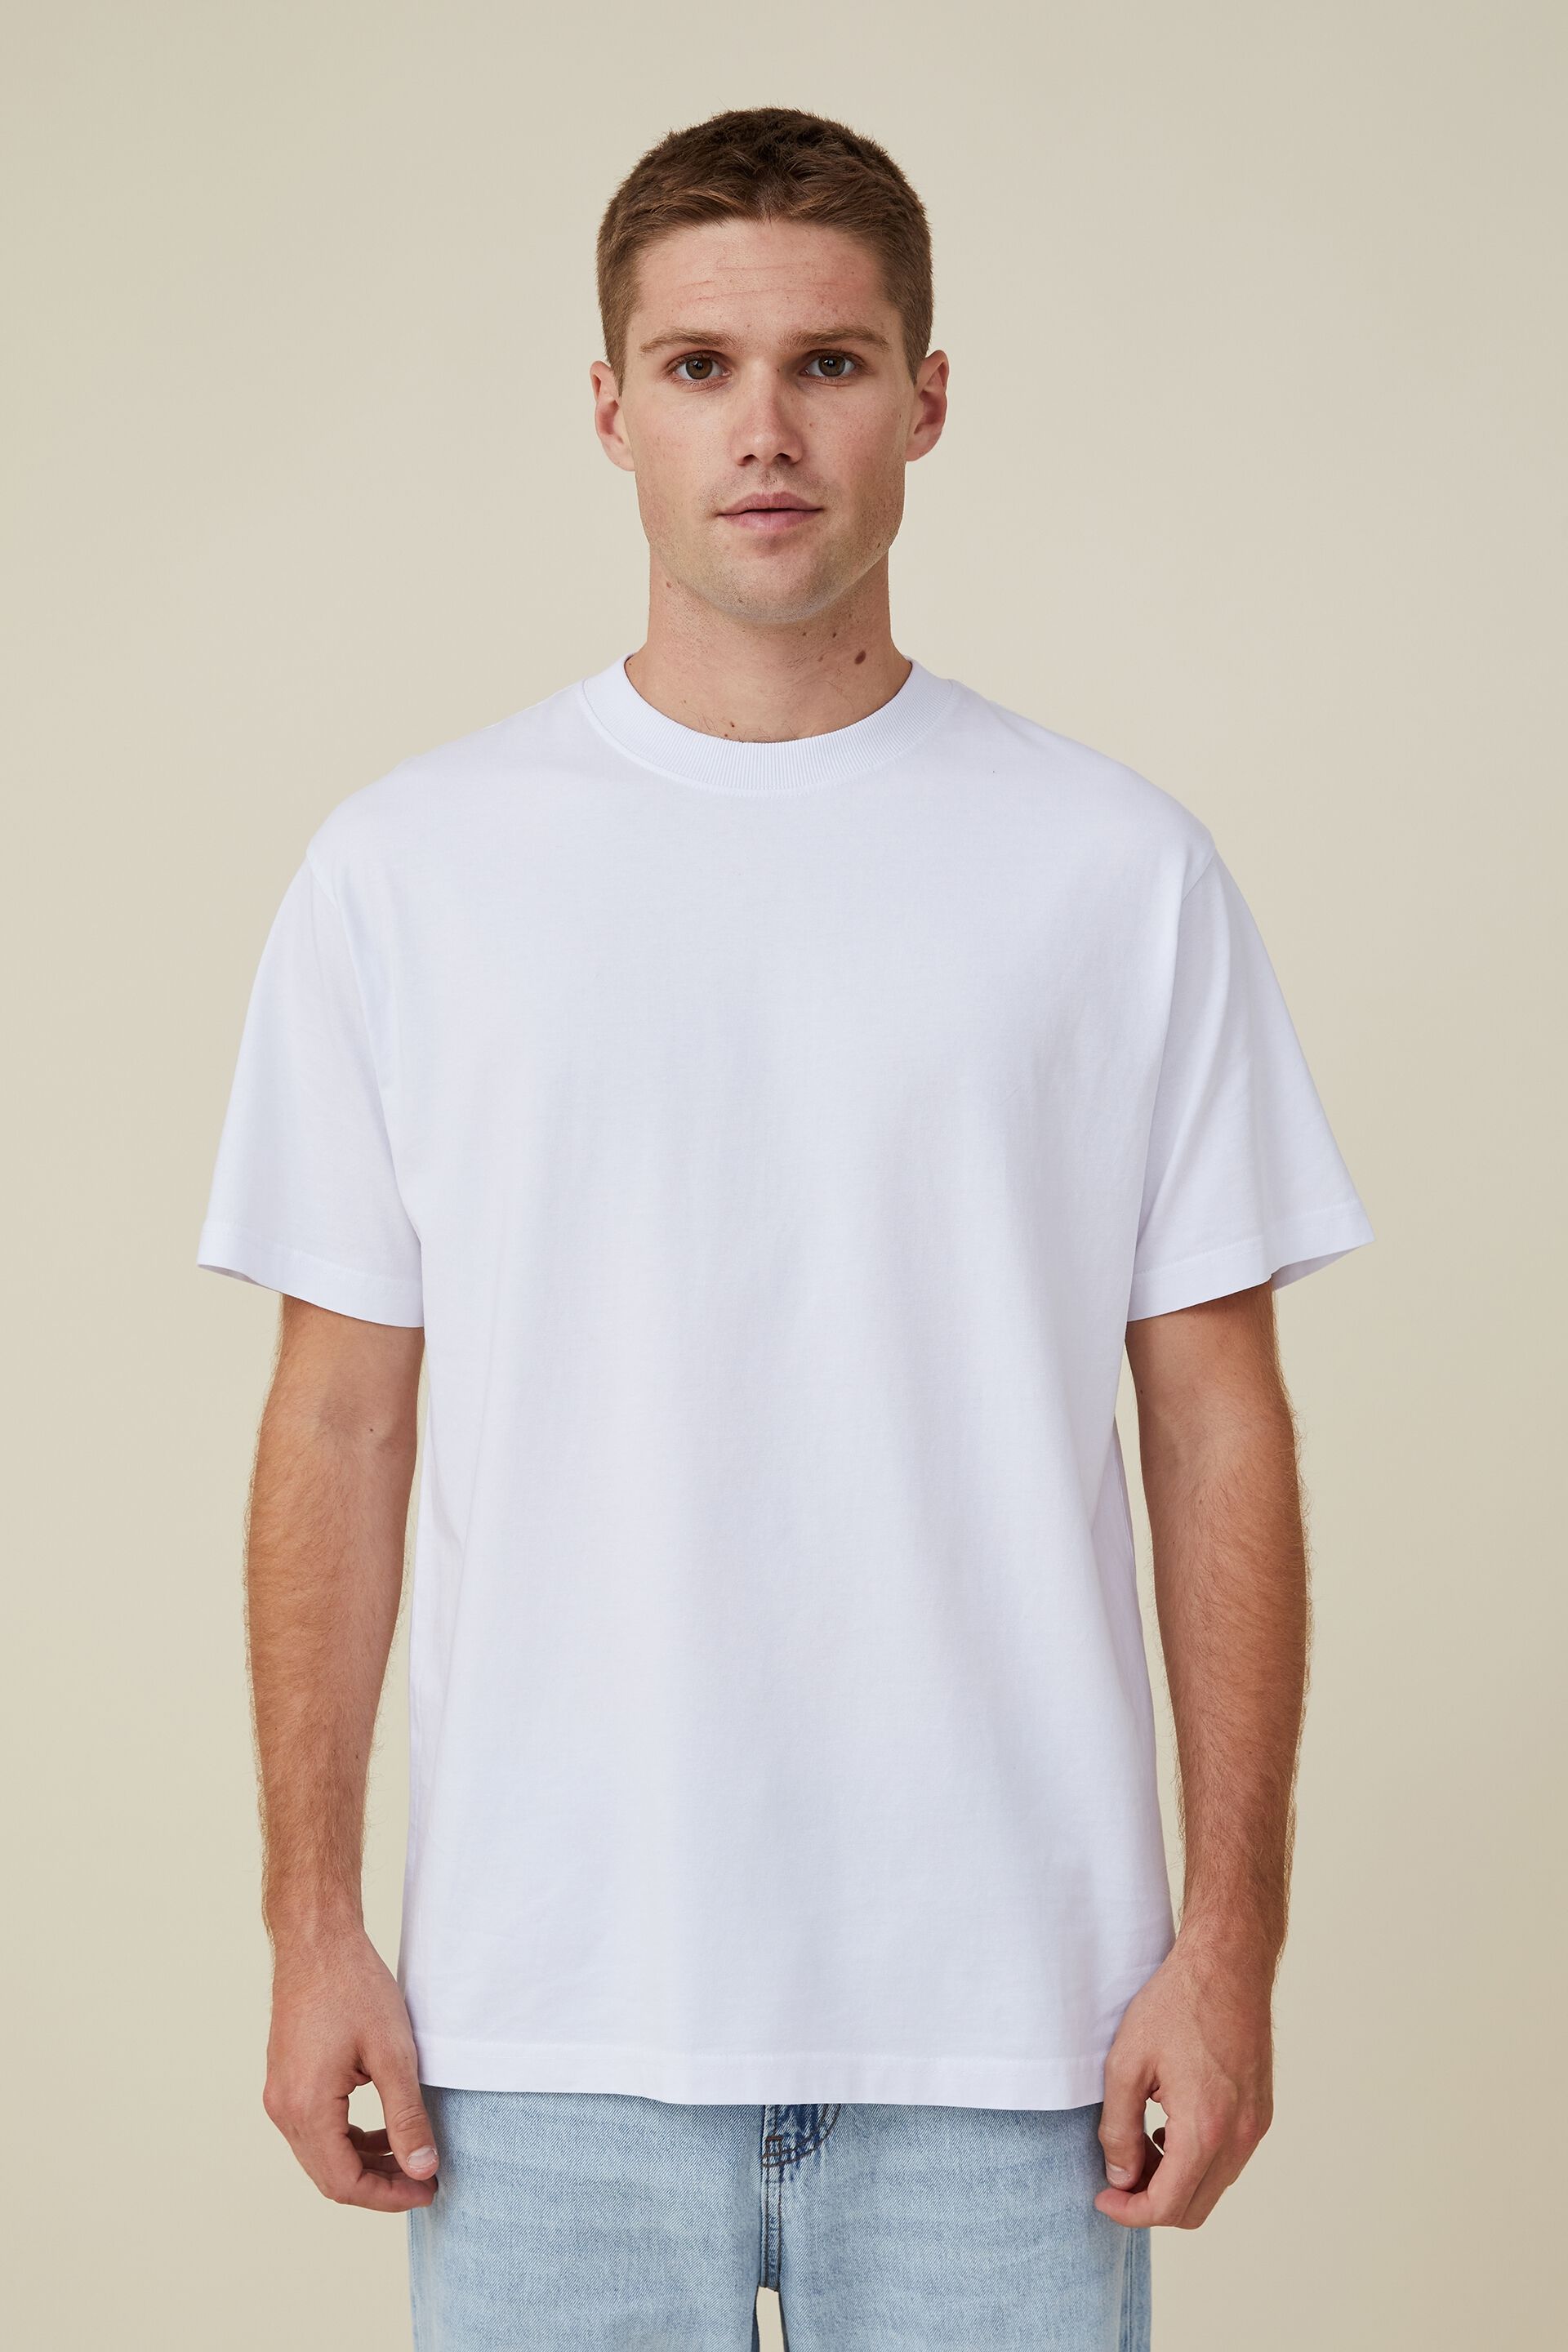 U.S. Polo Assn. Denim Co. White Cotton Muscle Fit Printed T-Shirt